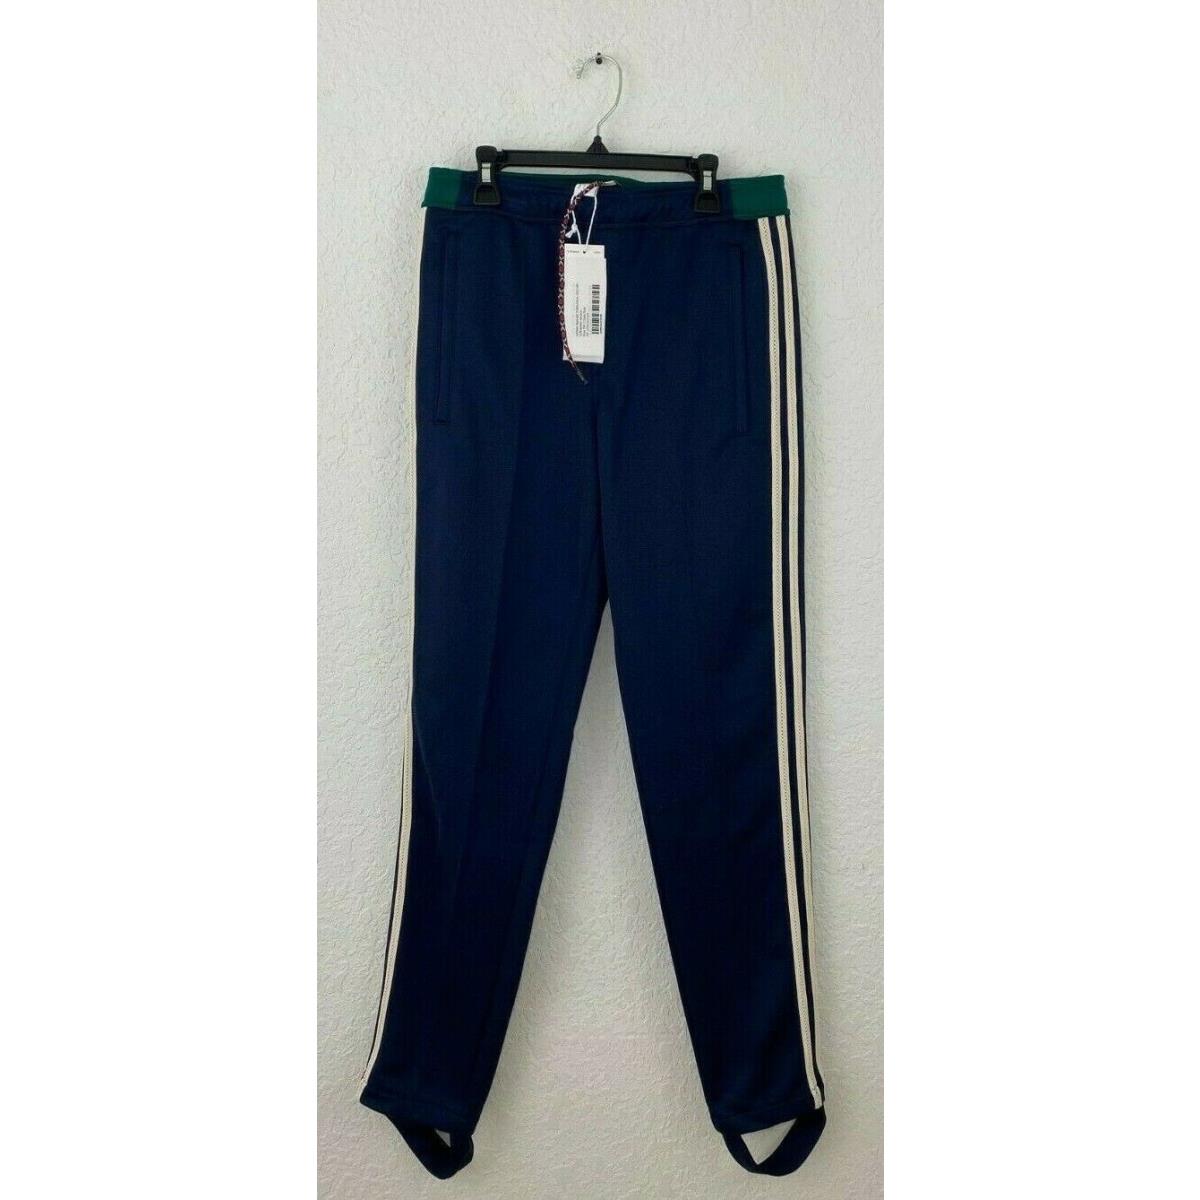 Adidas Wales Bonner Mens Lovers Track Pants Collegiate Green Size Small